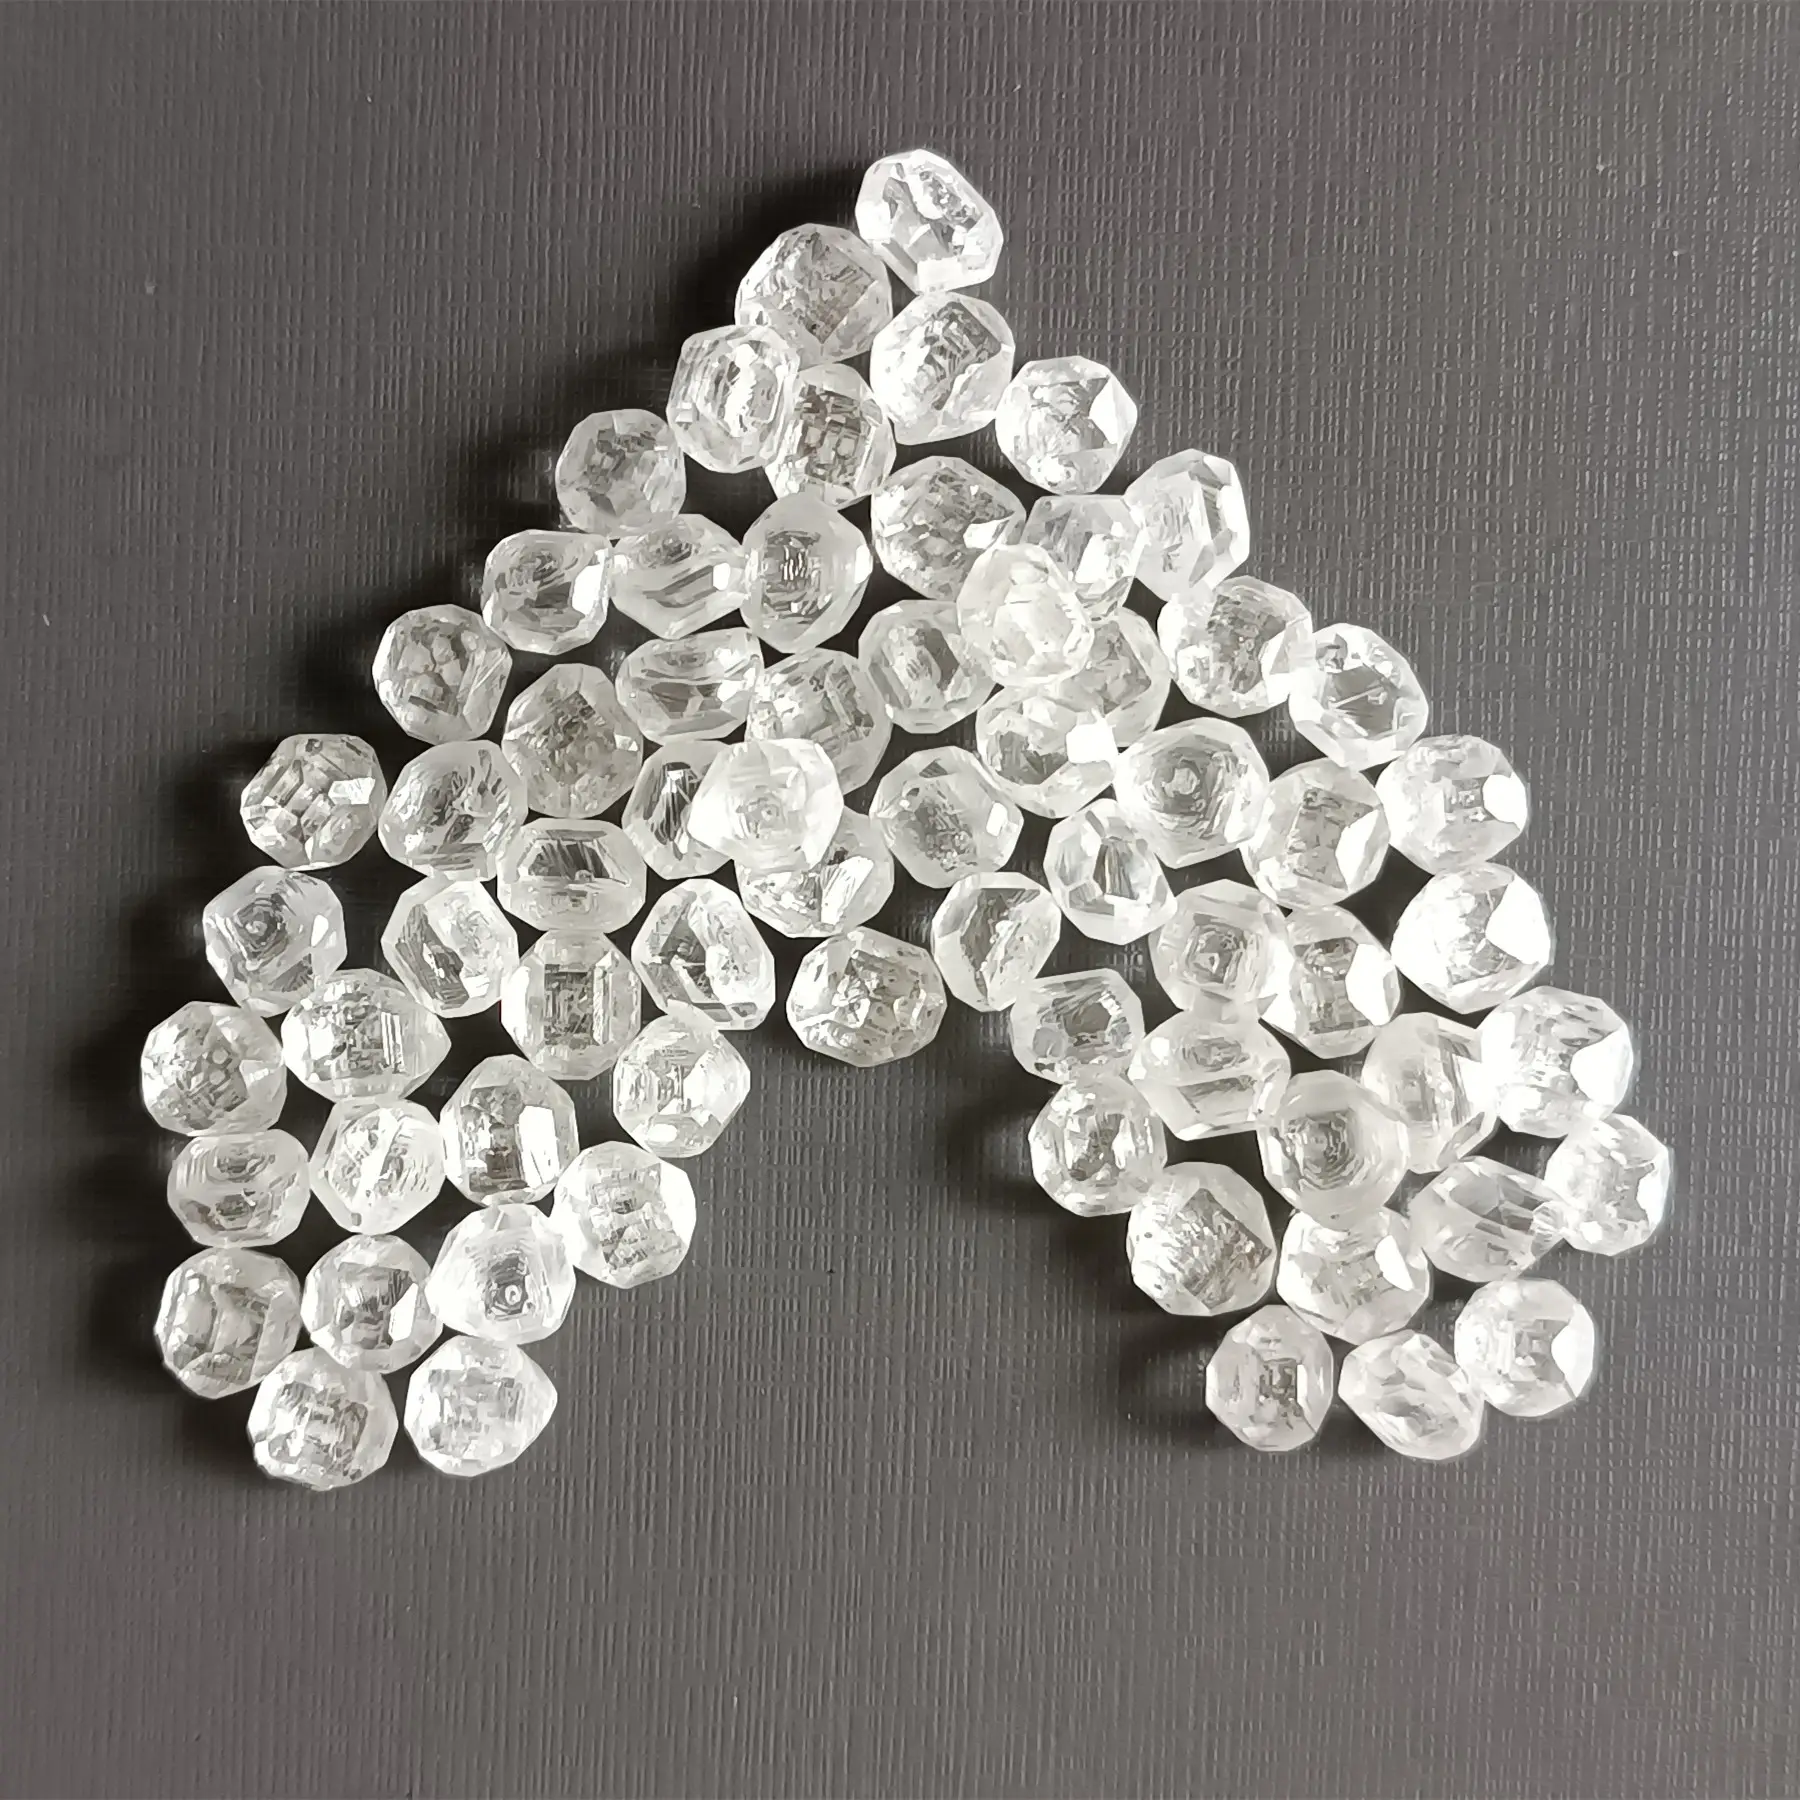 Lab Grown HPHT CVD Synthetic Rough Diamond 1~12 carat Best Quality China Supplier